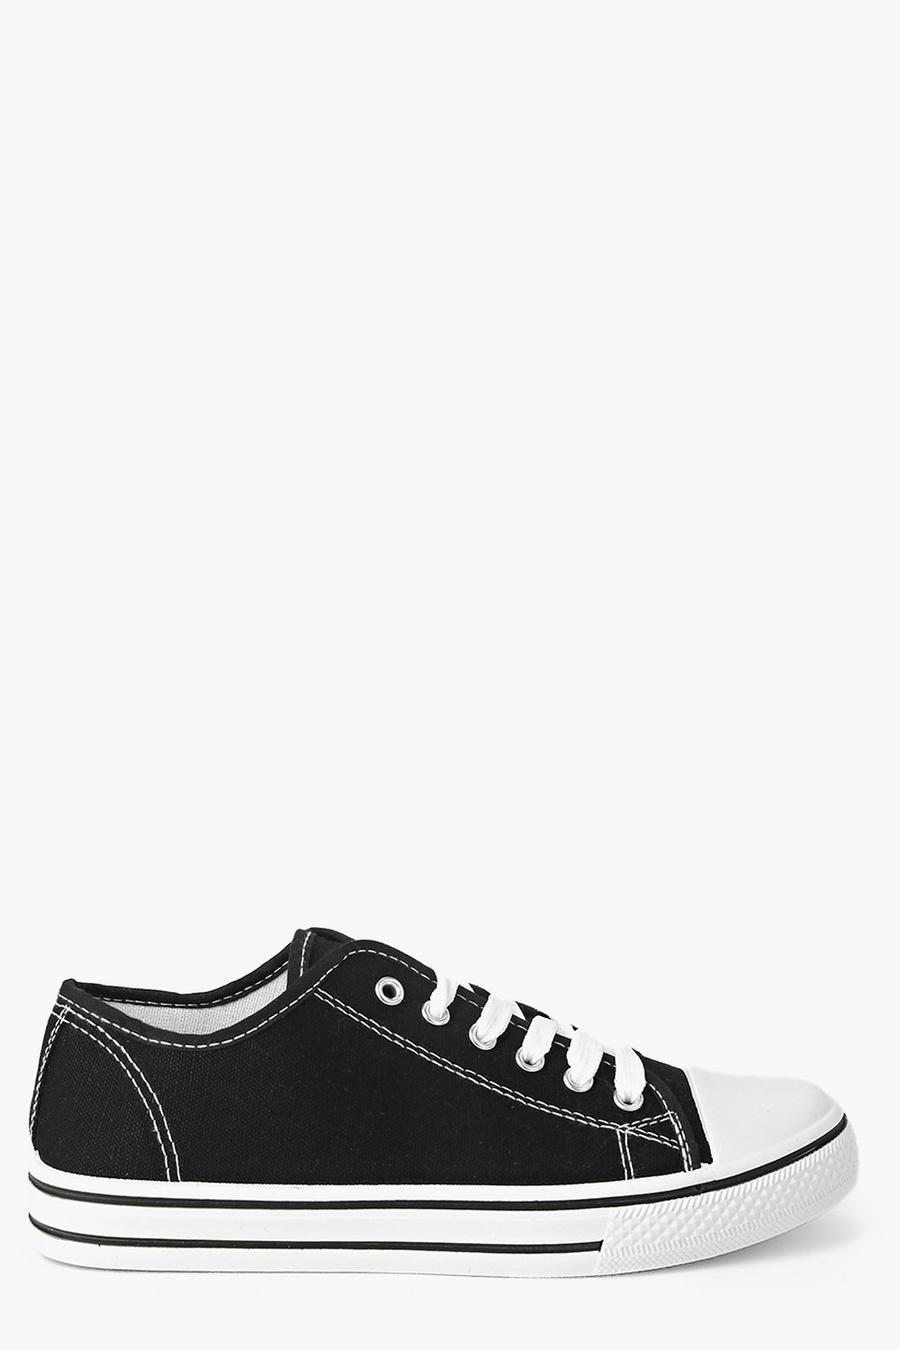 Black Lace Up Canvas Flat Sneakers image number 1